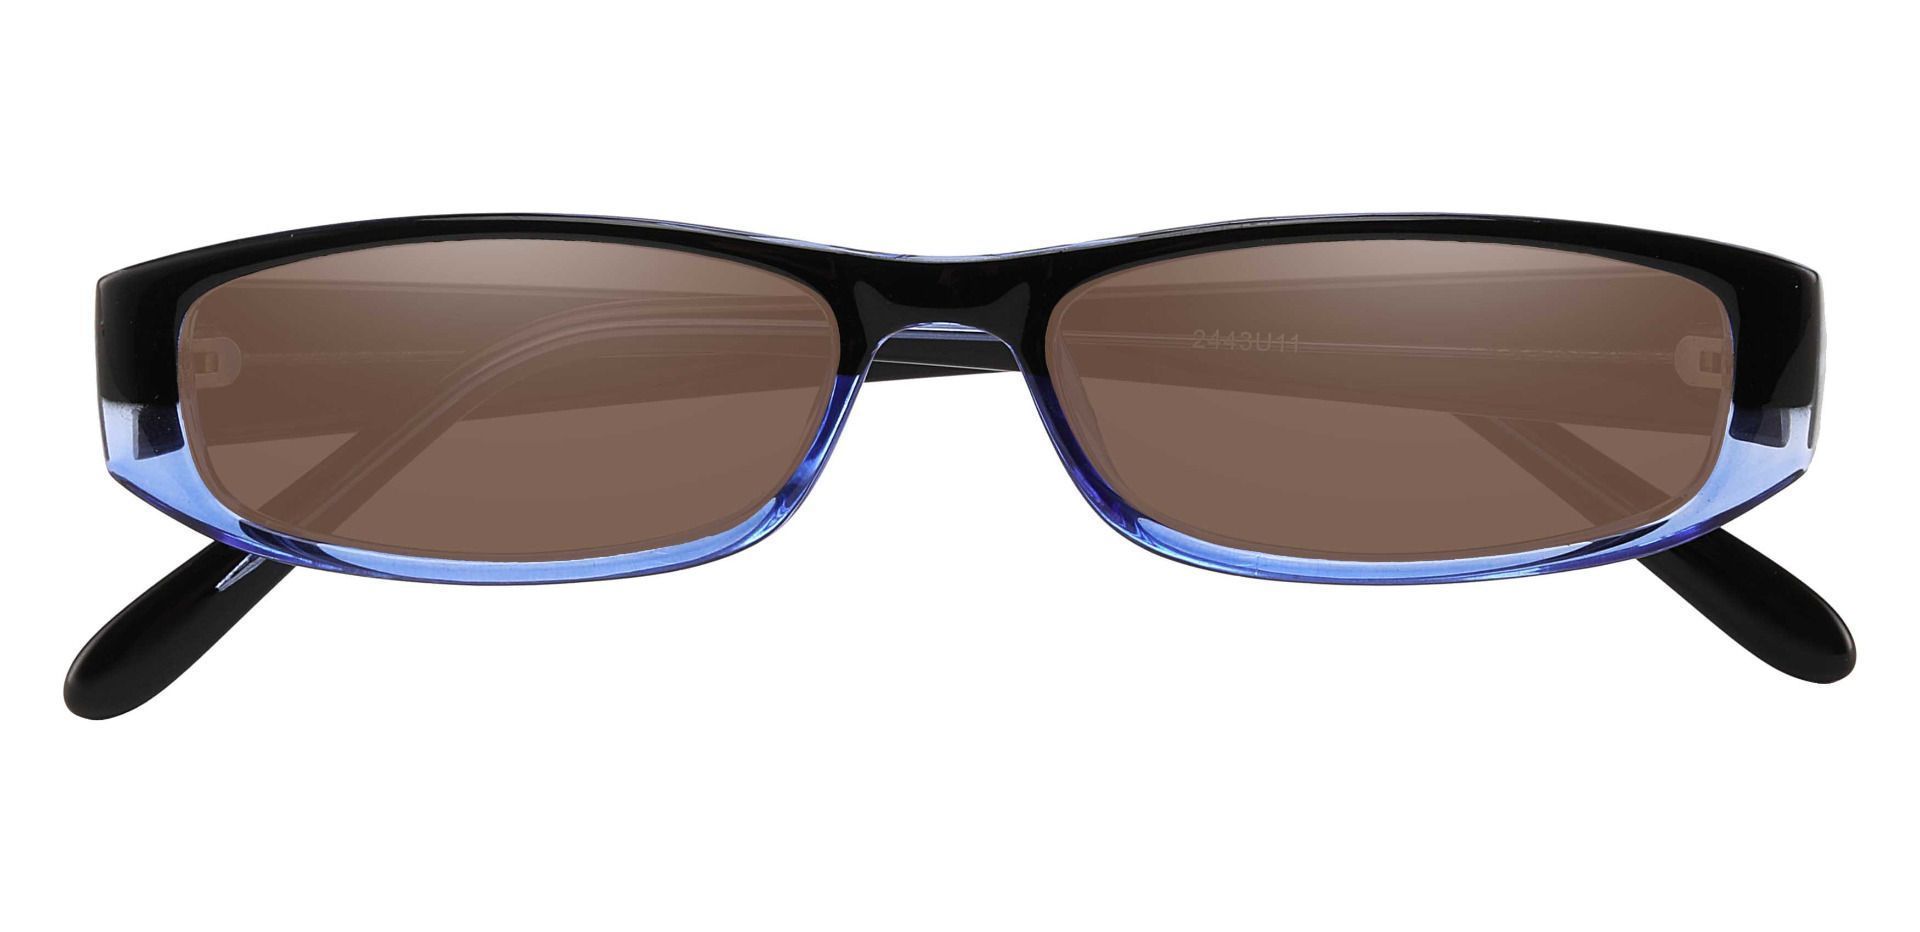 Elgin Rectangle Non-Rx Sunglasses - Blue Frame With Brown Lenses